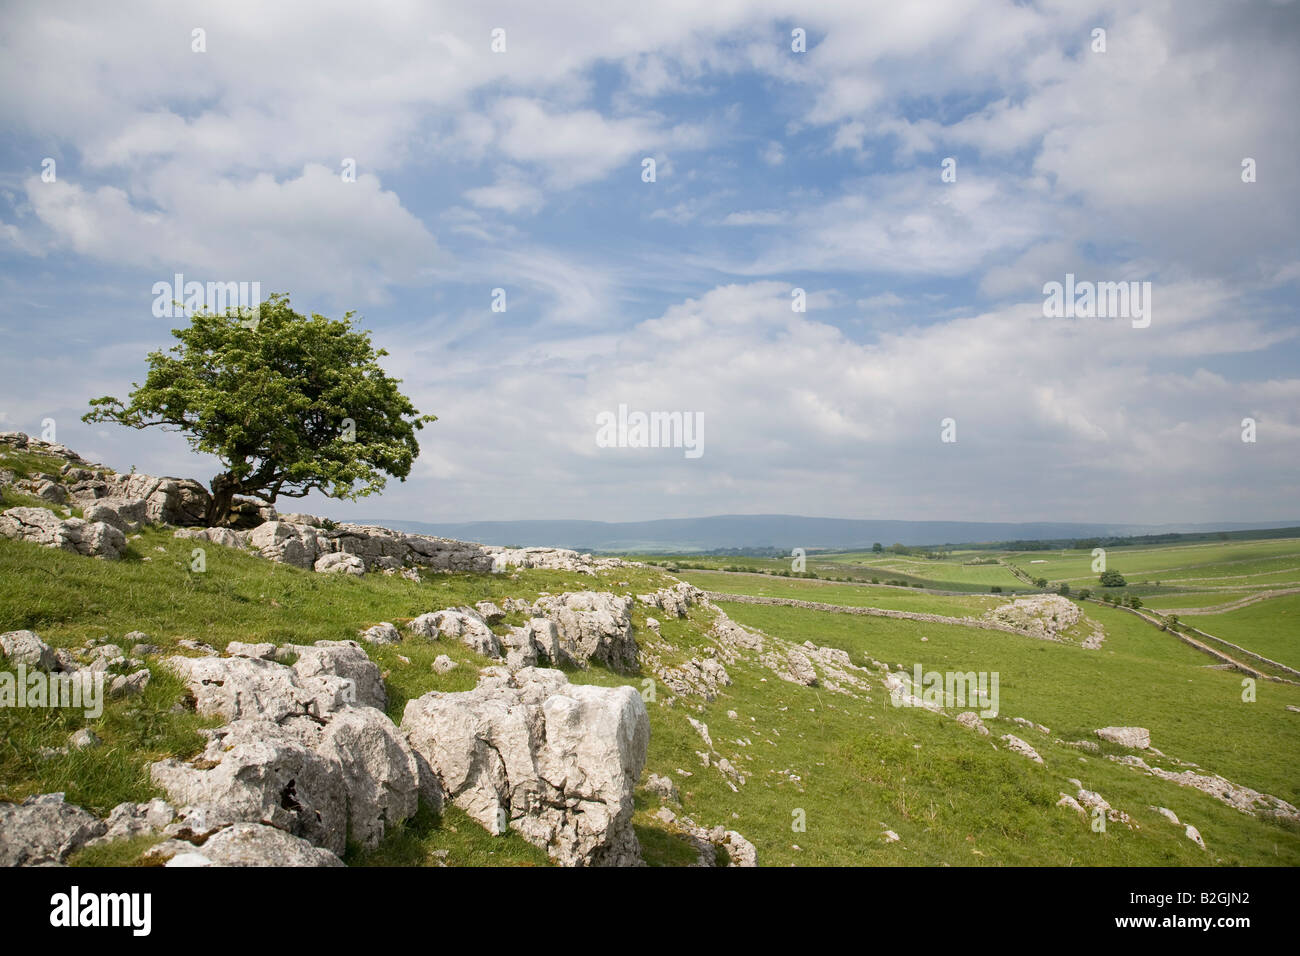 Hawthorn growing from a limestone outcrop Cumbria Stock Photo